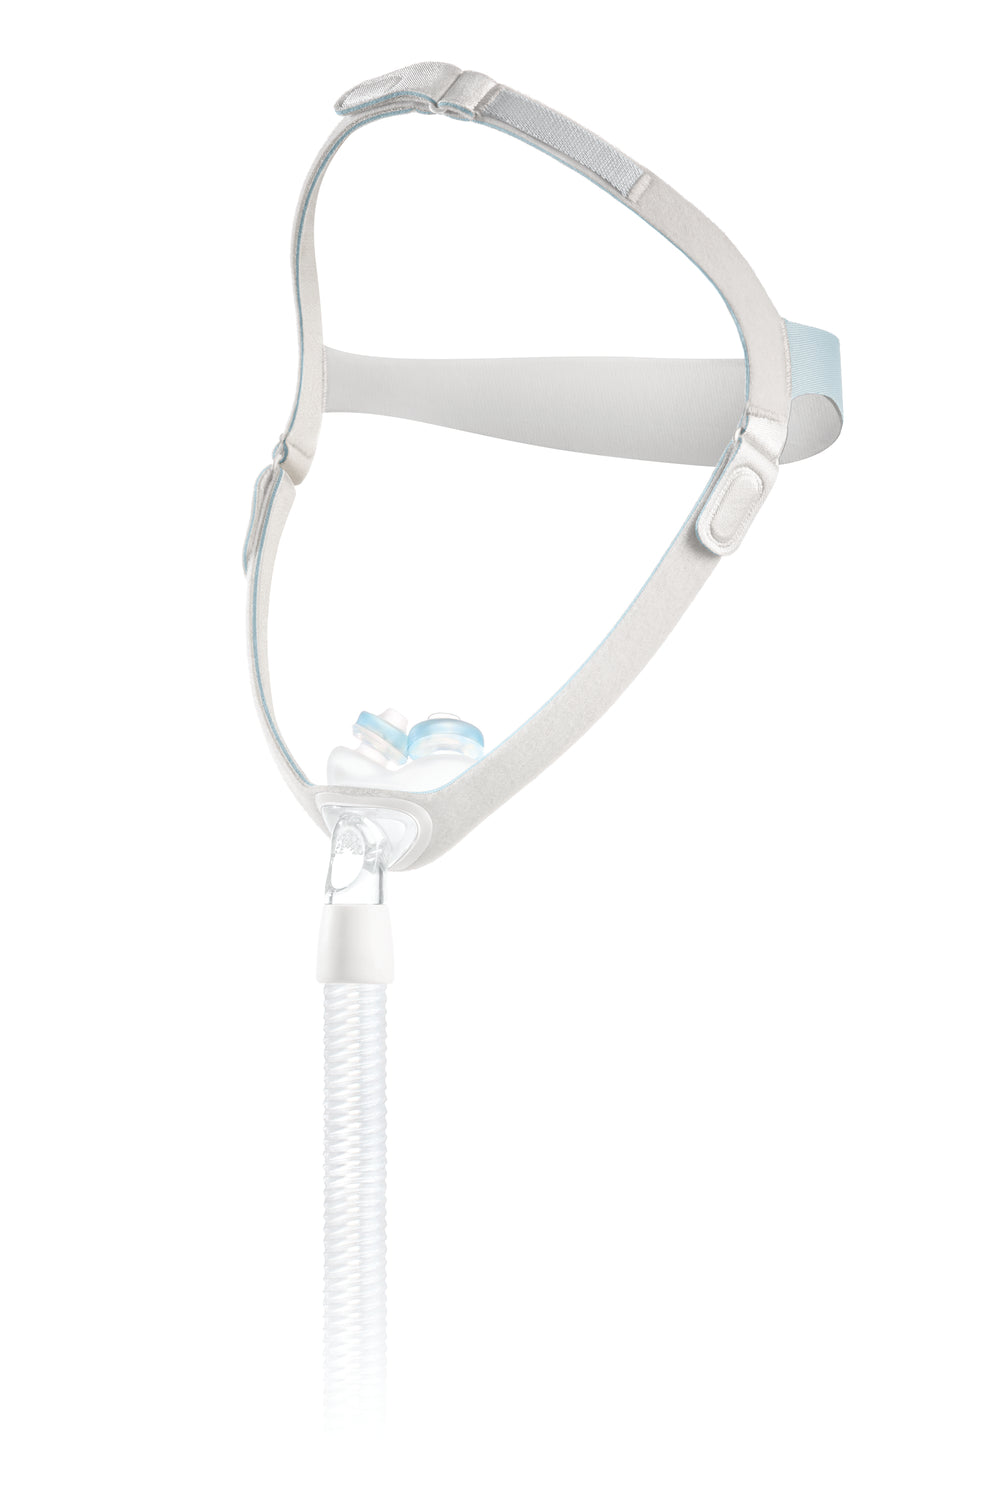 Nuance Pro/Nuance nasal pillow CPAP mask with gel nasal pillows